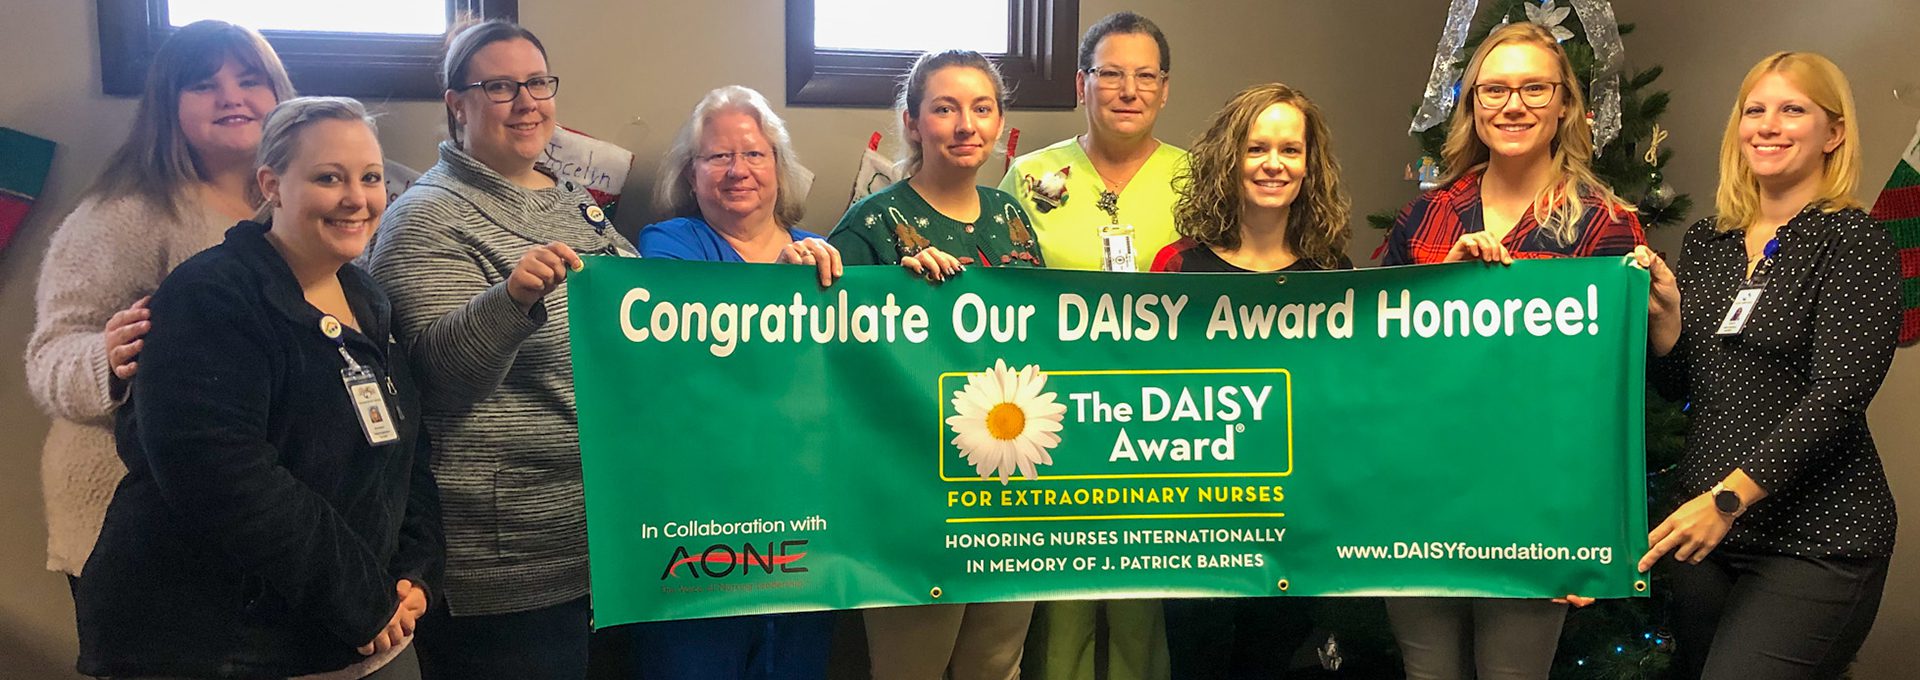 Carterville Nurses with DAISY Award honoree and banner